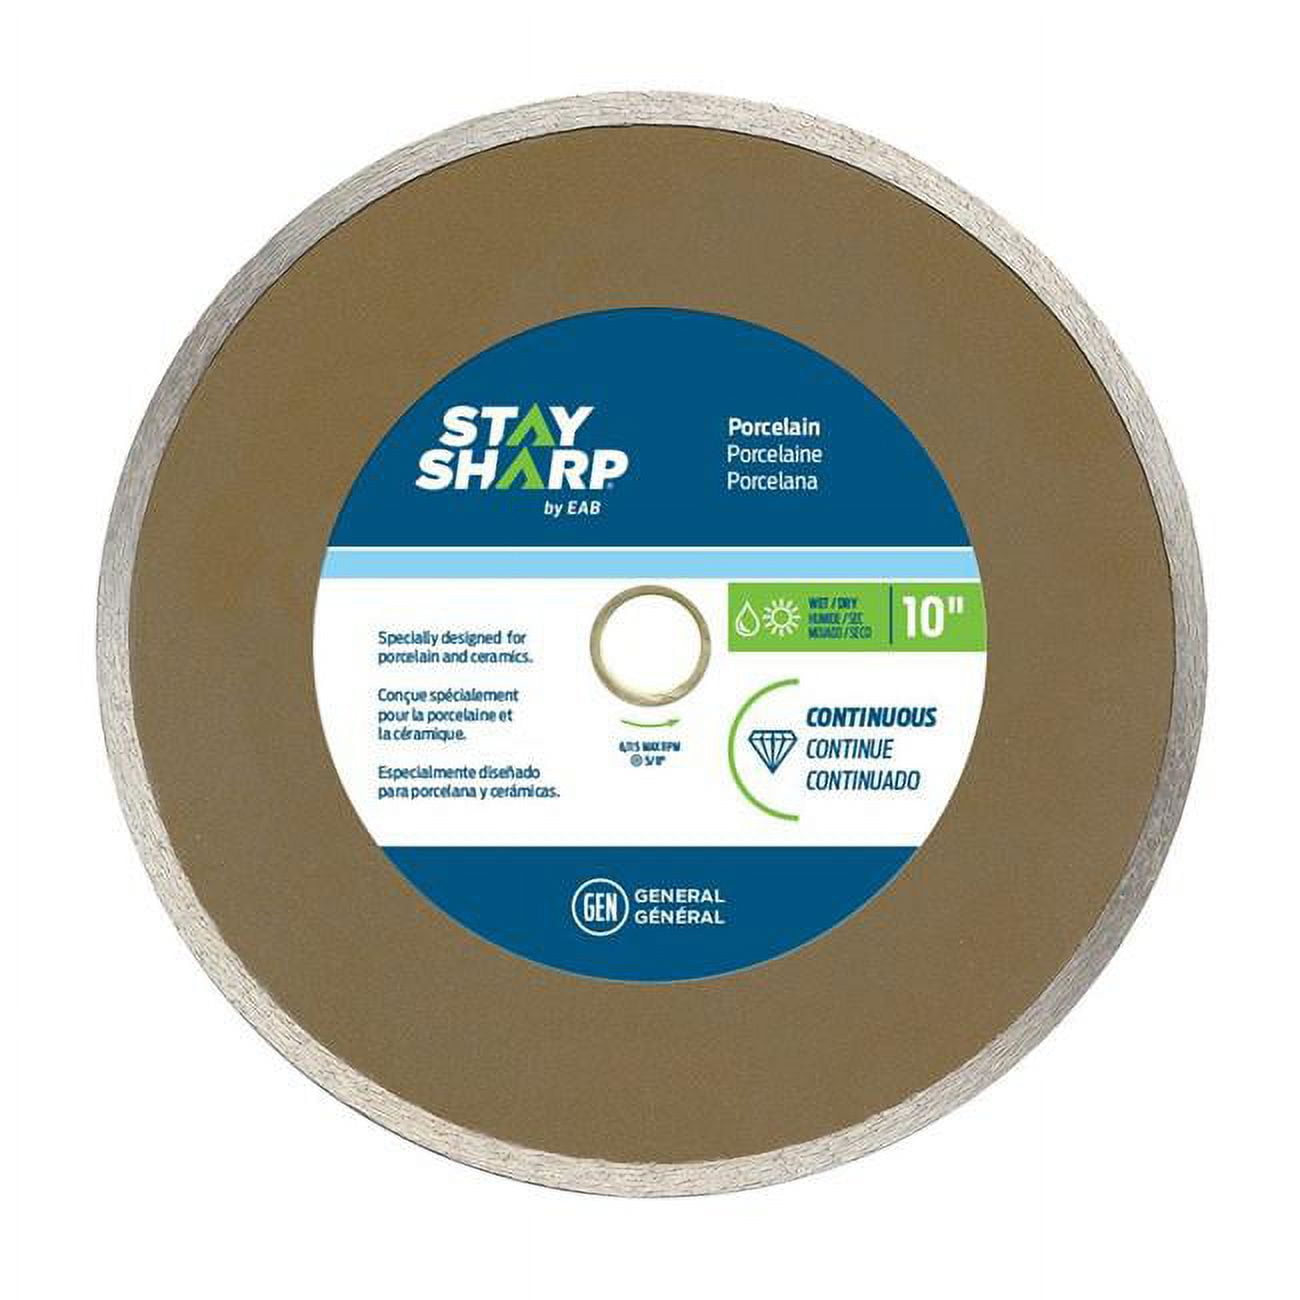 2120392 10 in. Continuous Rim Porcelain Tile Bronze Diamond Blade - Recyclable -  Stay Sharp